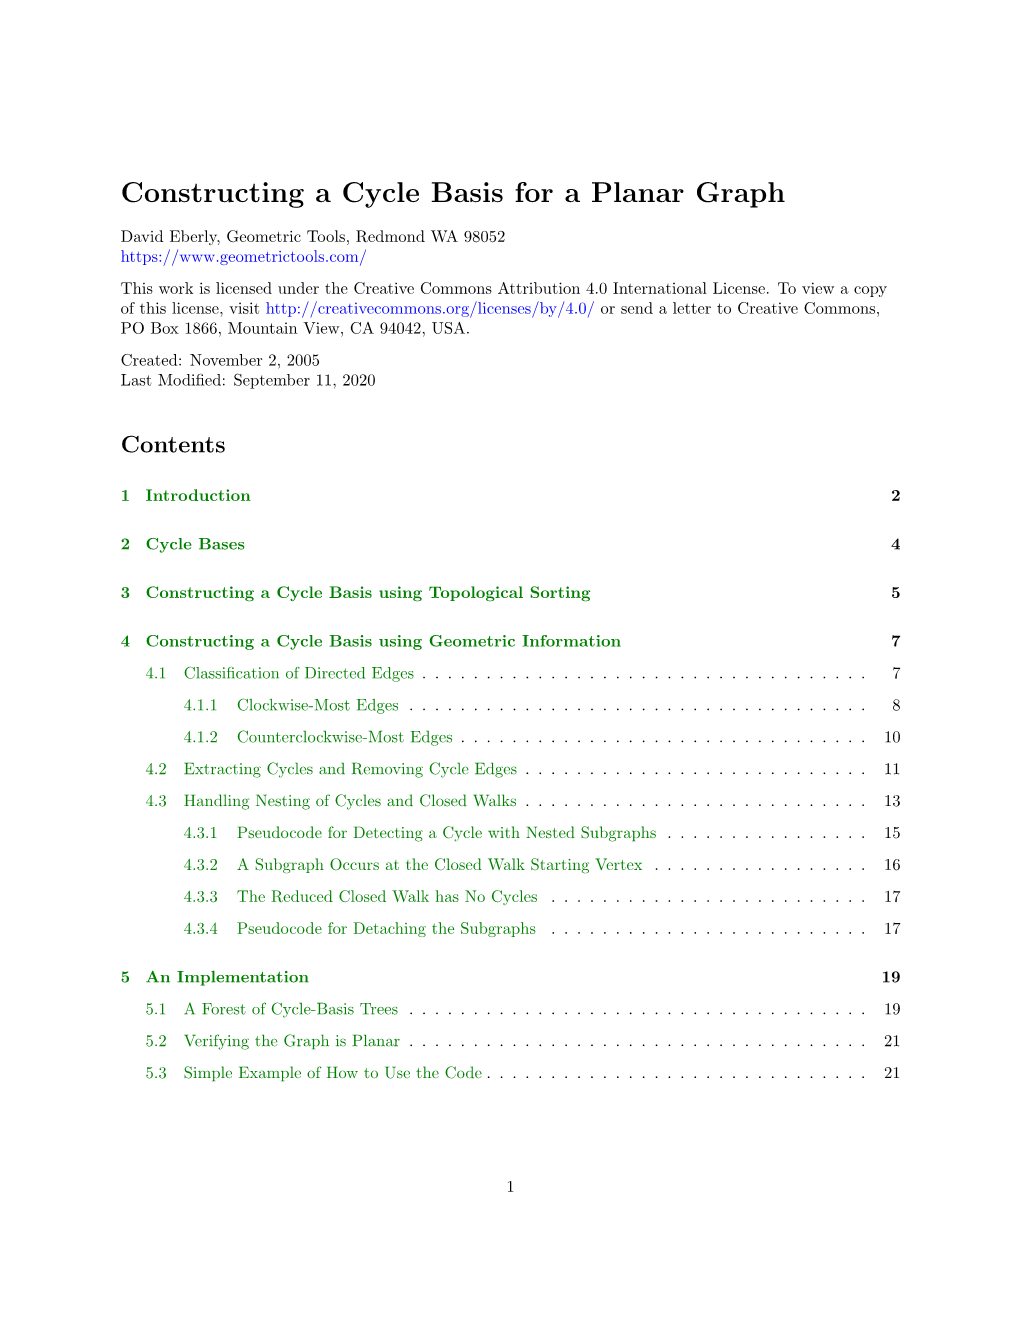 Constructing a Cycle Basis for a Planar Graph